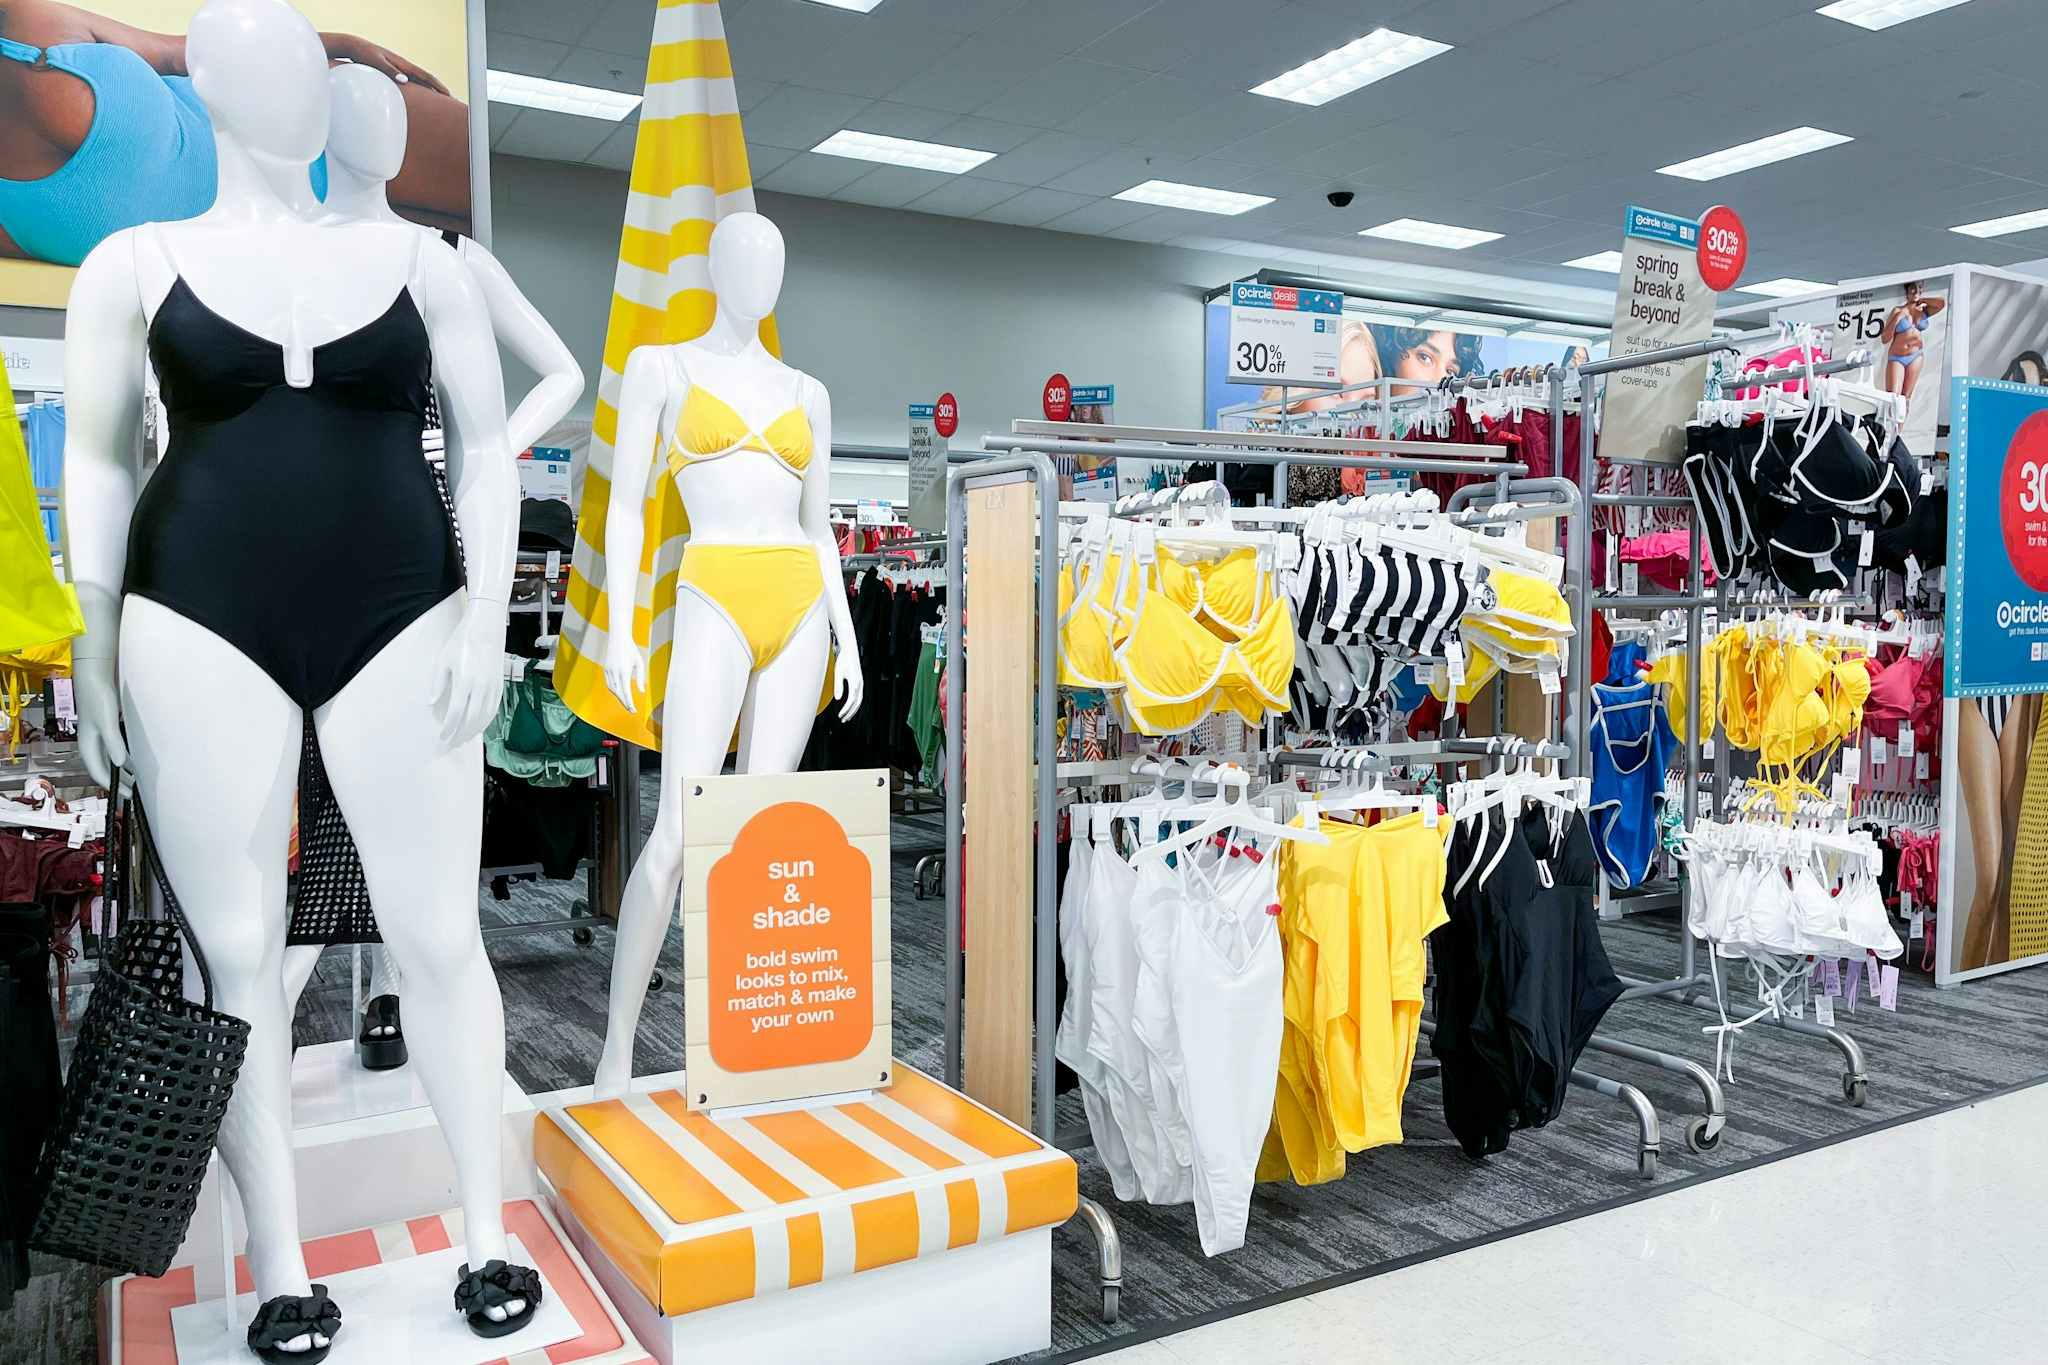 Women's Swimwear on Sale at Target: $7 Tops, $8 Bottoms, $13 One-Pieces